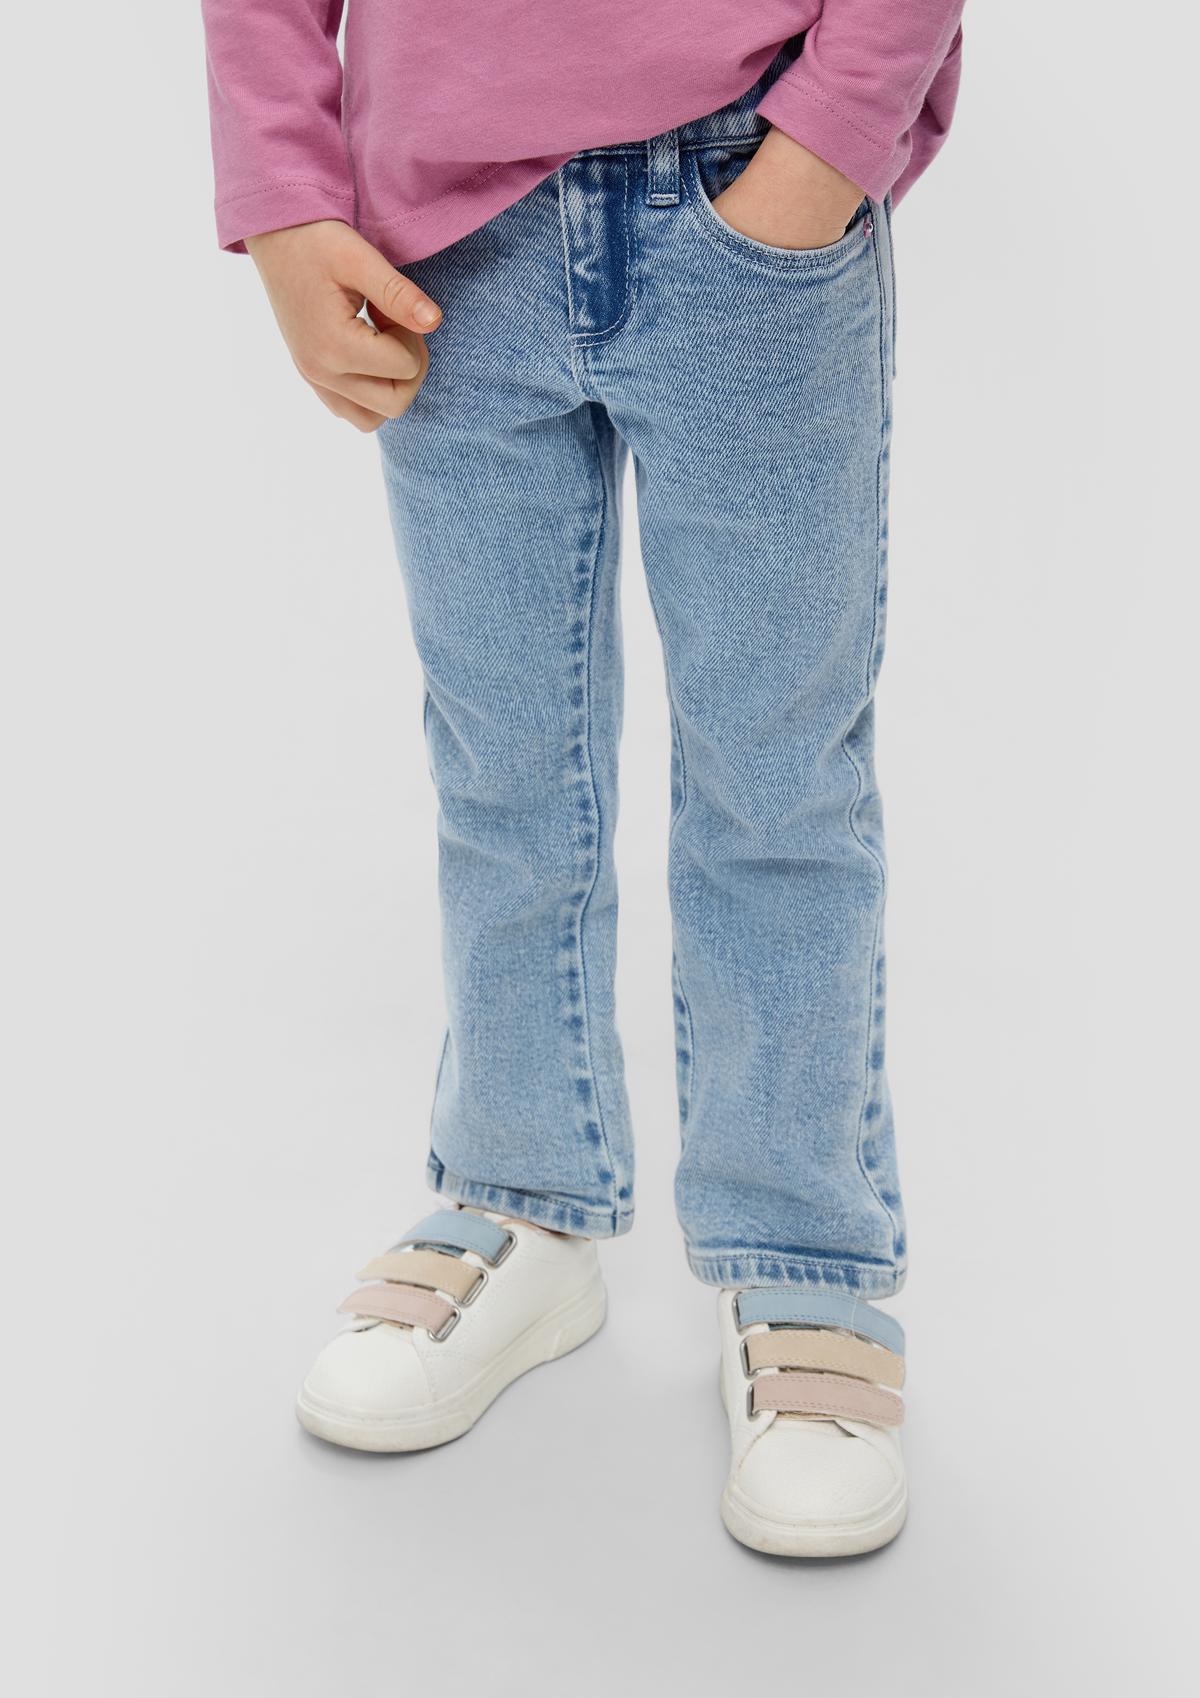 s.Oliver Jeans Betsy / Regular Fit / Mid Rise / Flared Leg